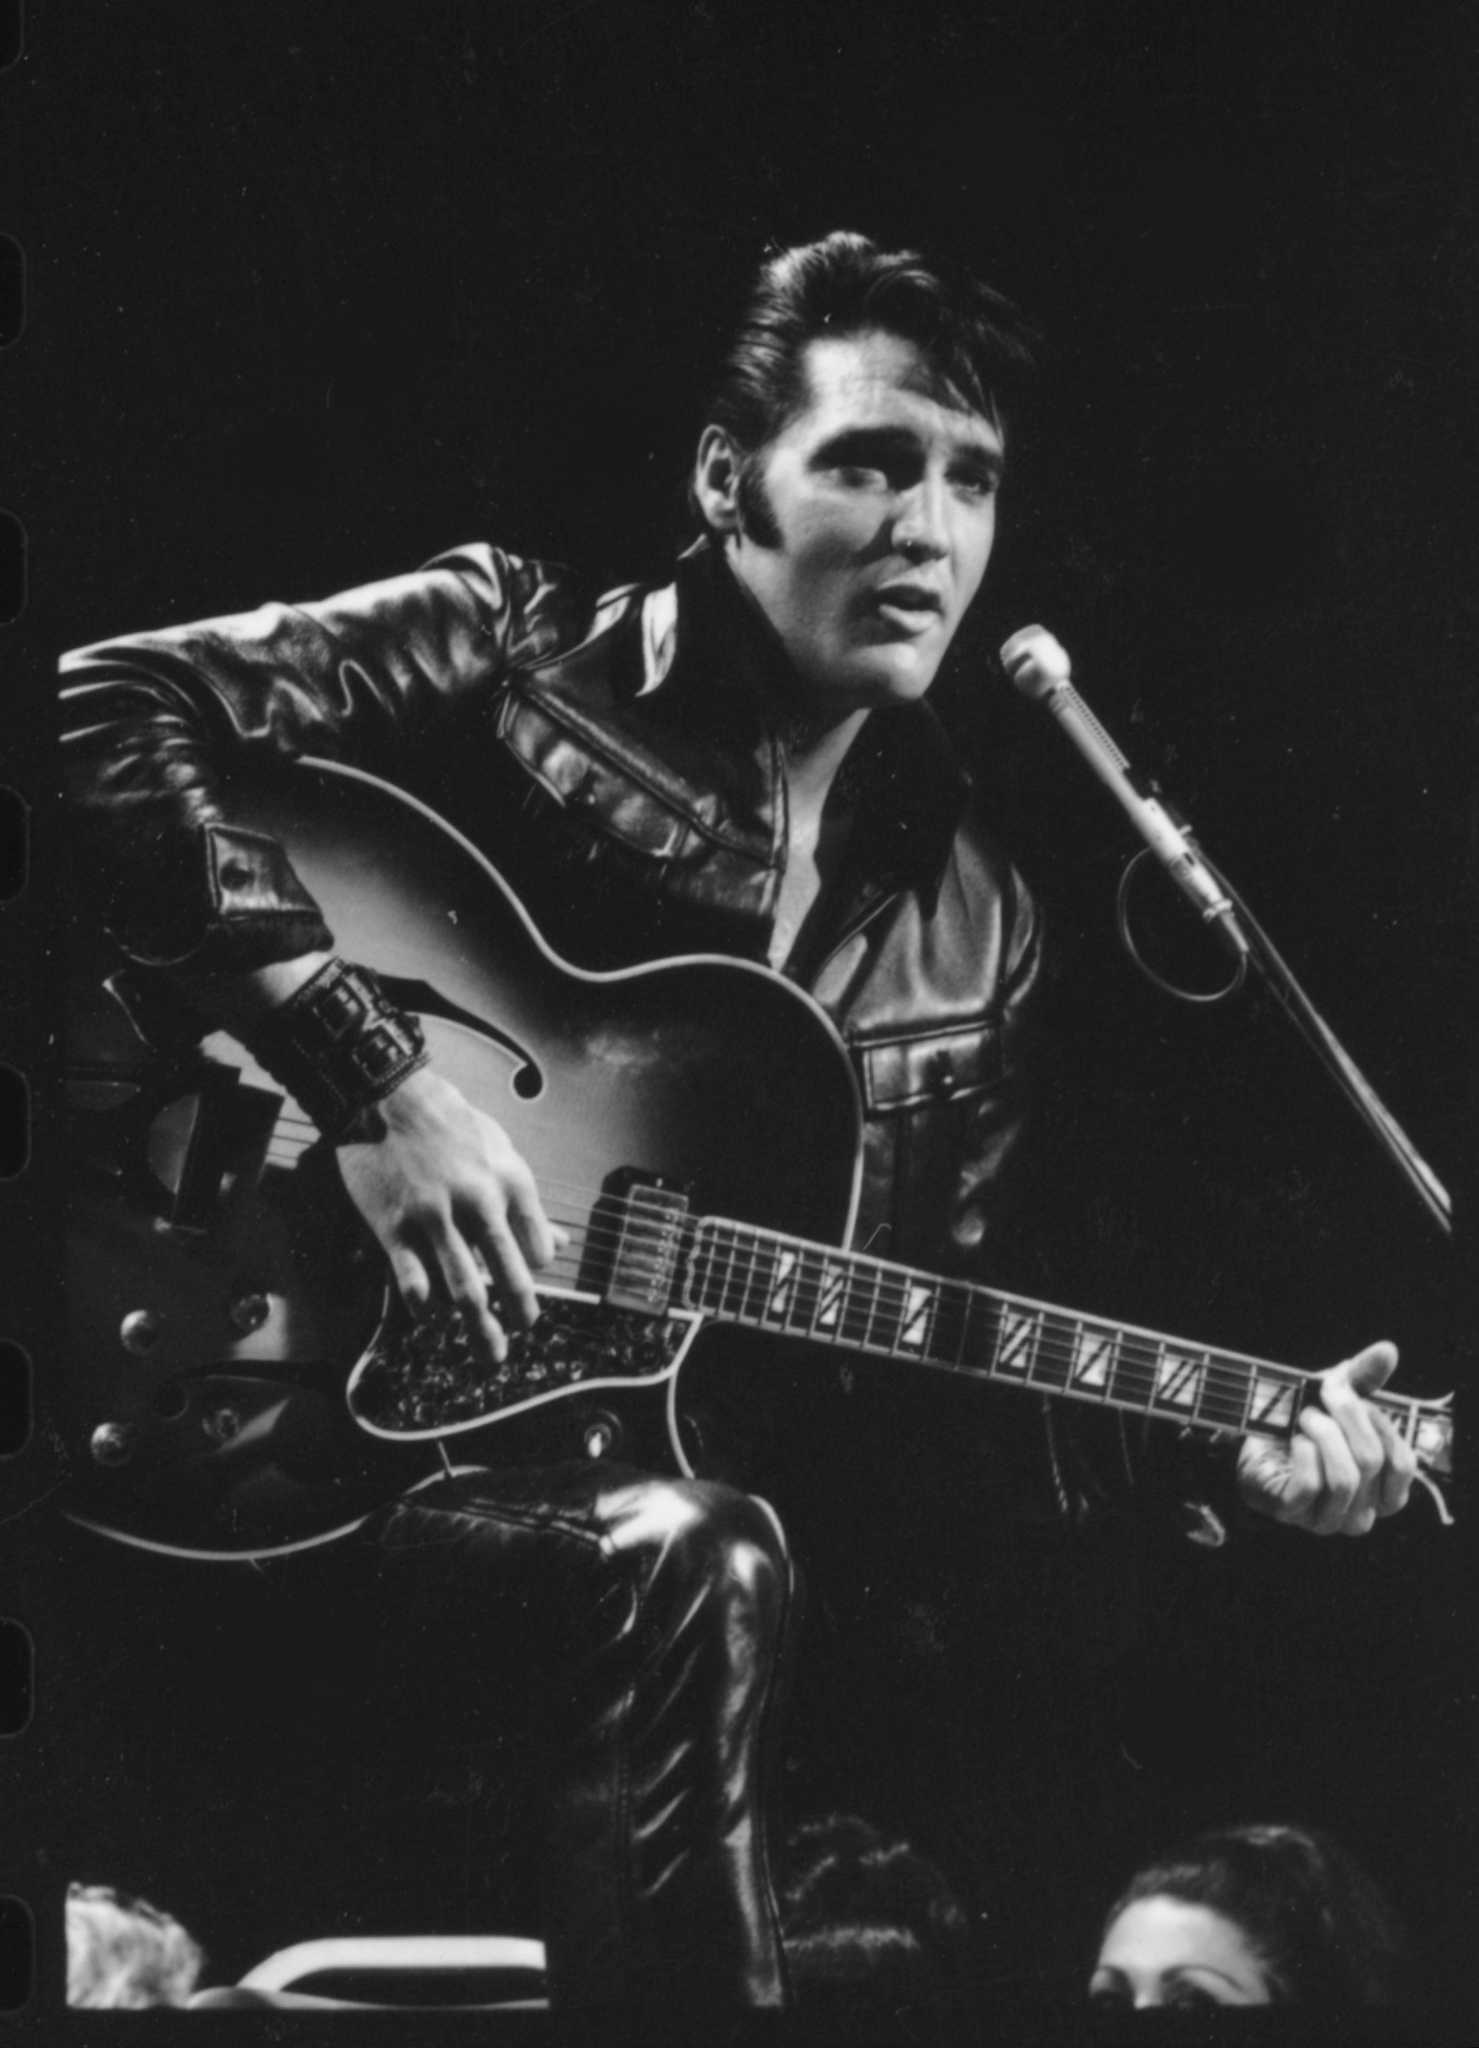 A comeback TV special changed everything for Elvis 50 years ago - Houston Chronicle